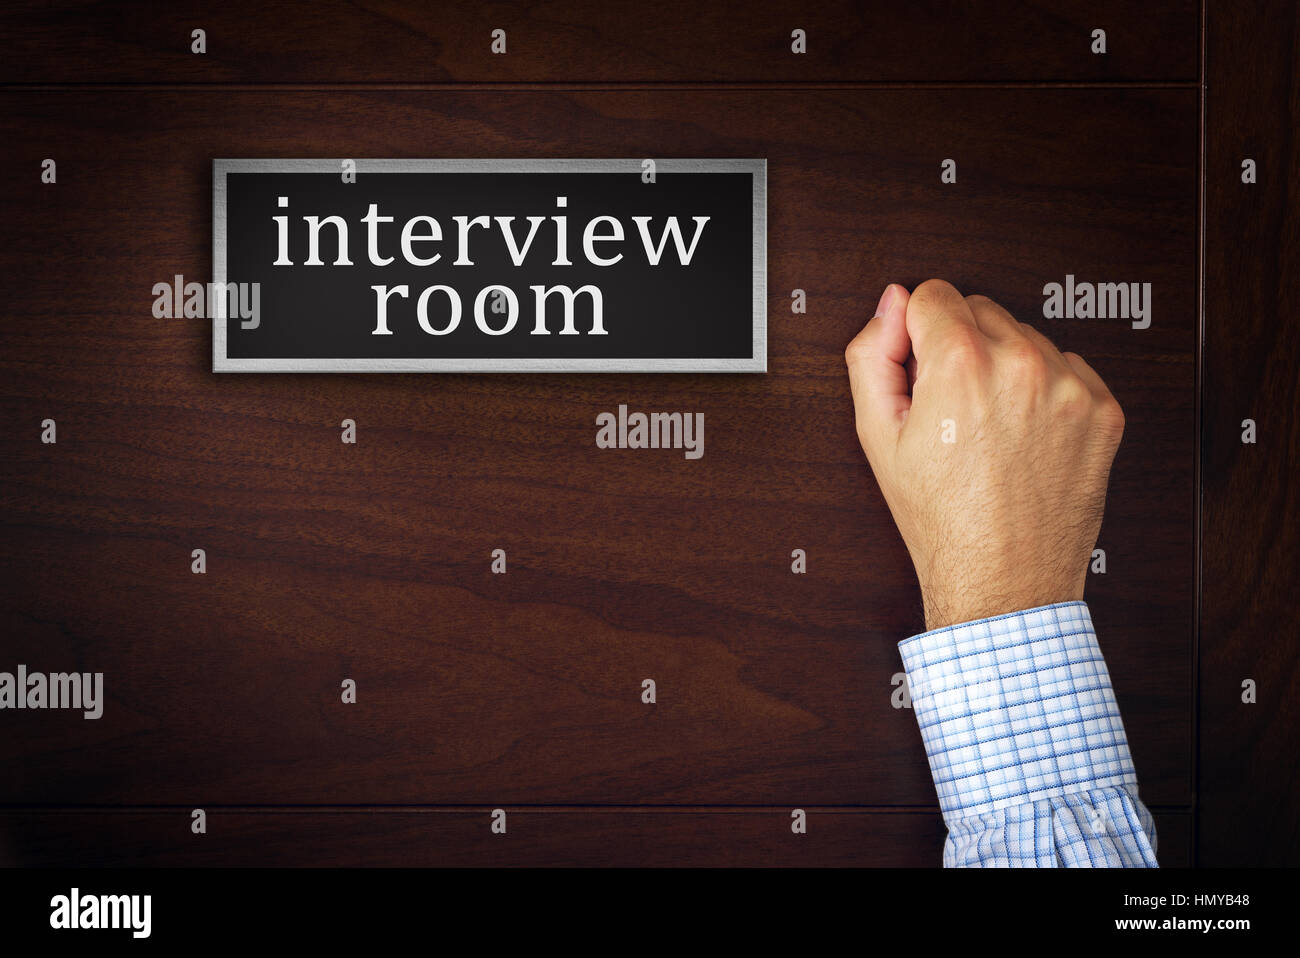 Businessman knocking on interview room door, man applying for a job, career opportunity concept Stock Photo